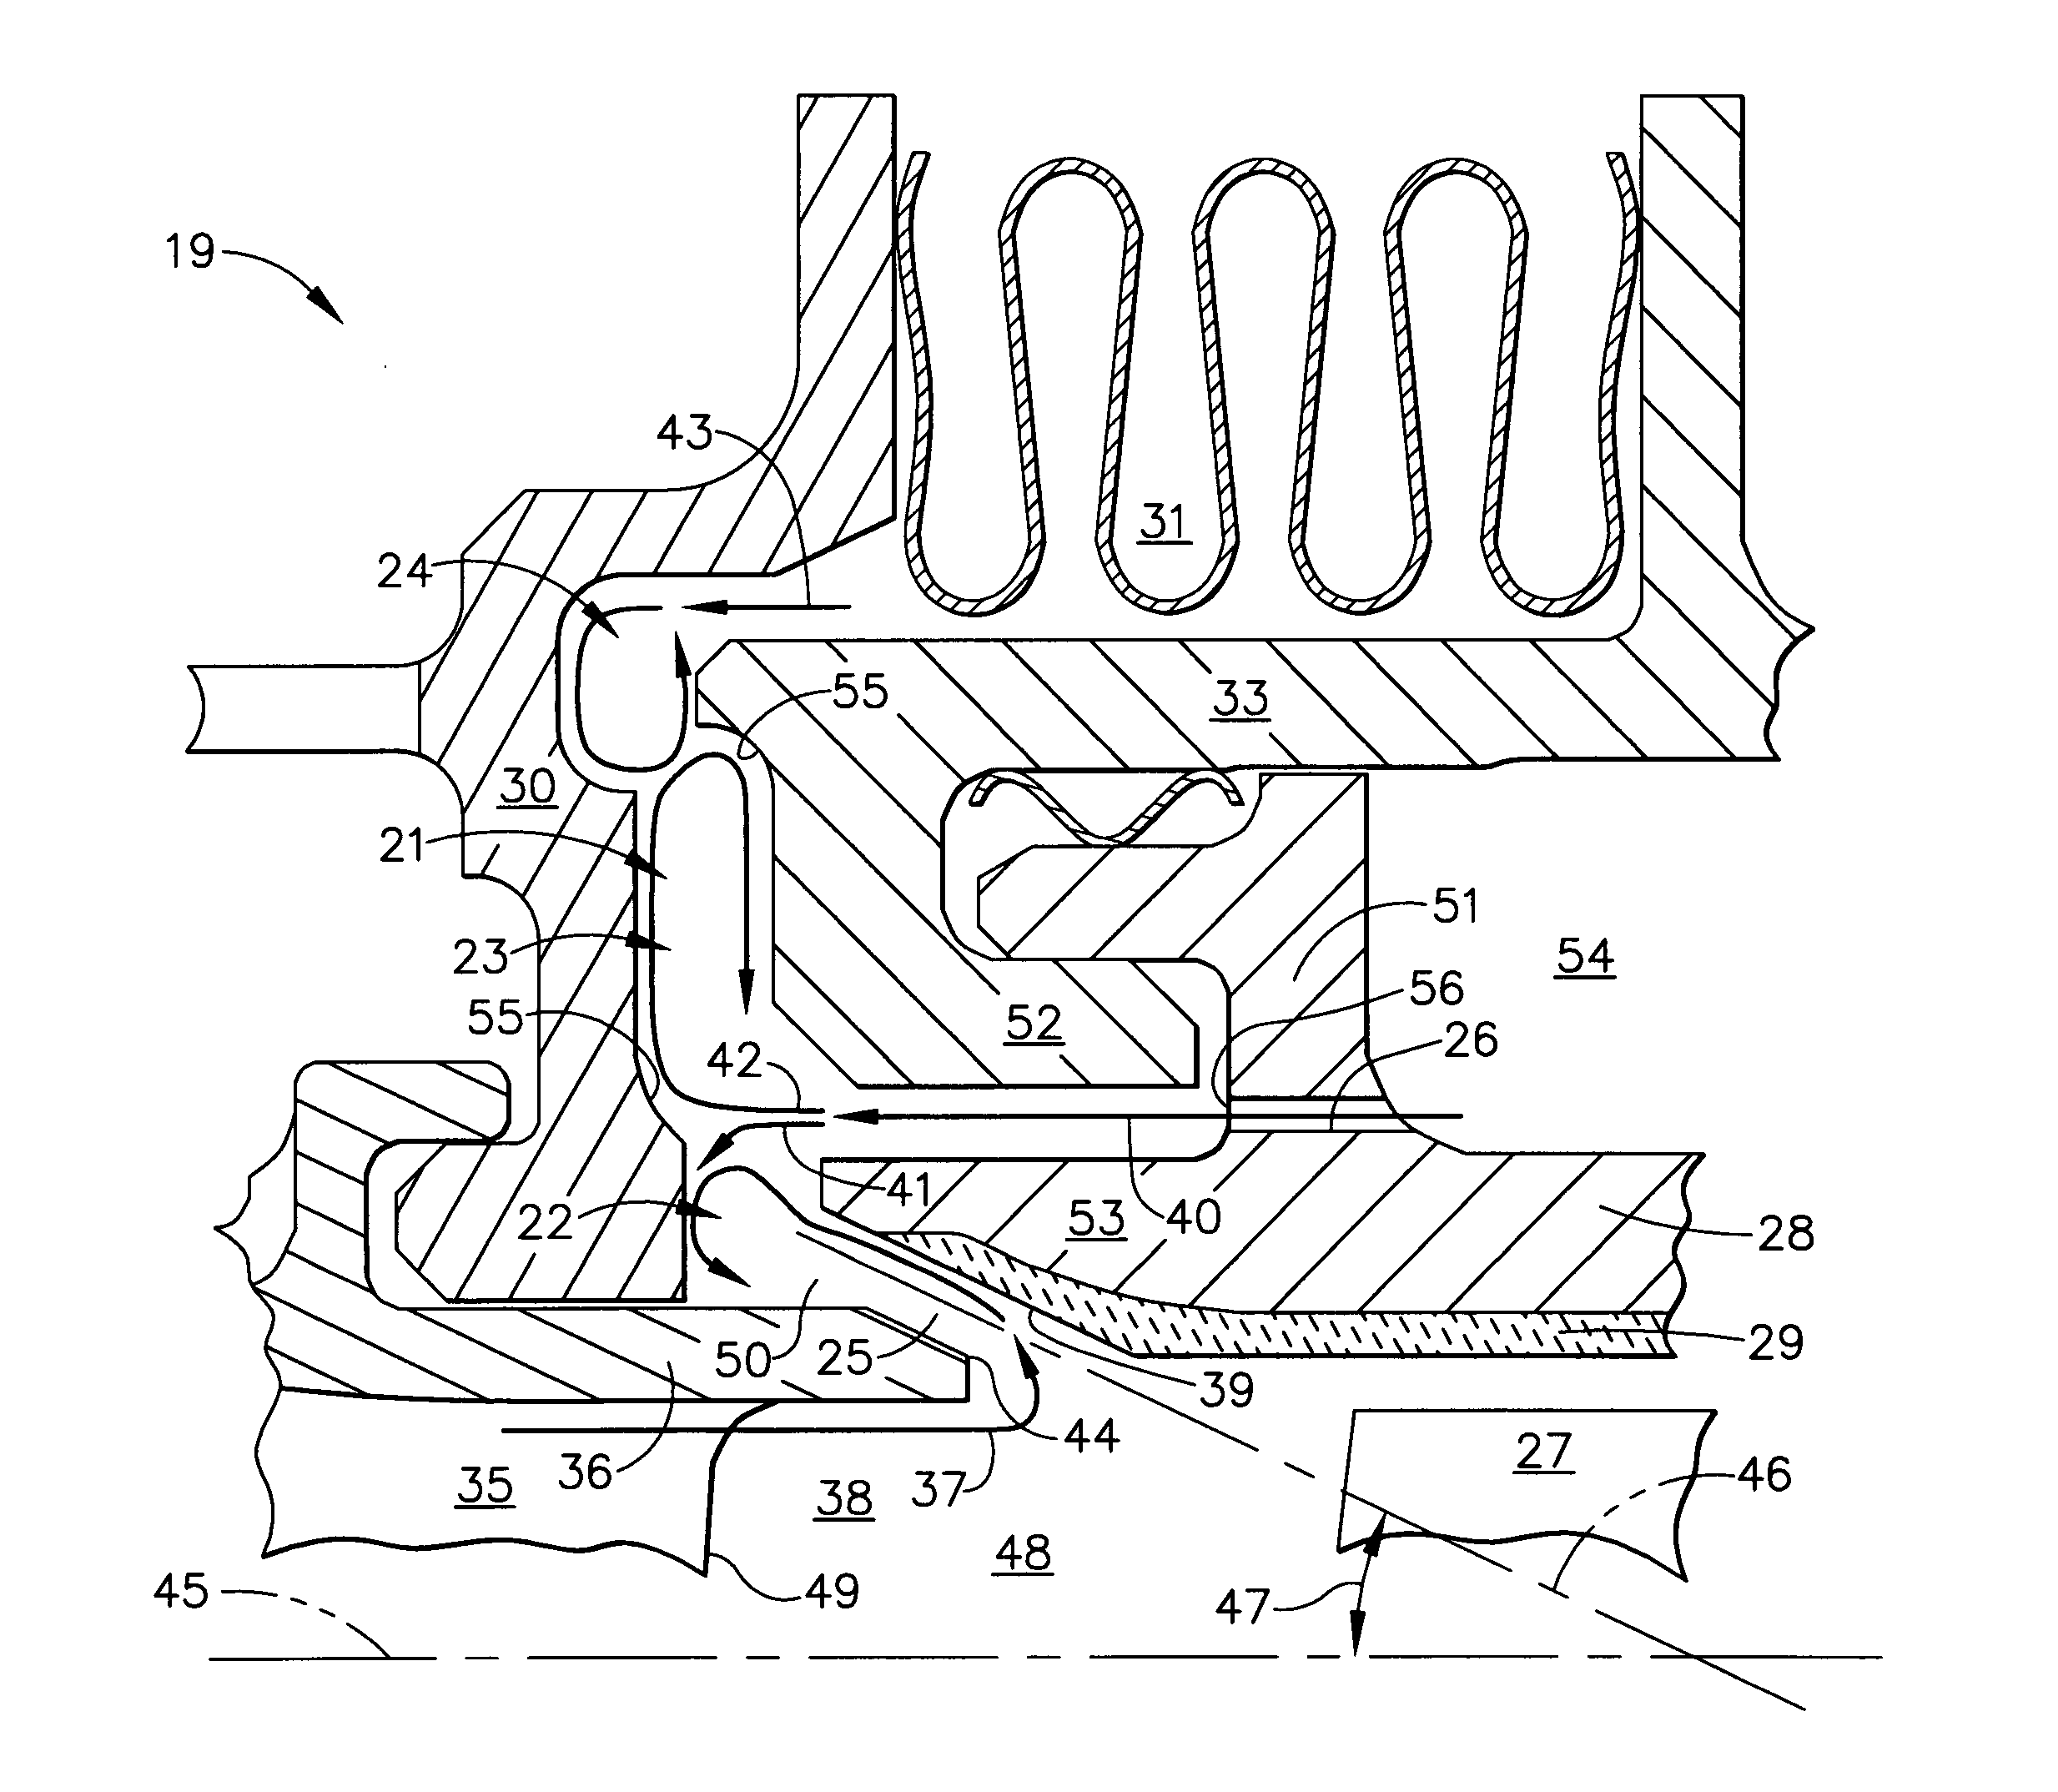 Gas turbine cooled shroud assembly with hot gas ingestion suppression